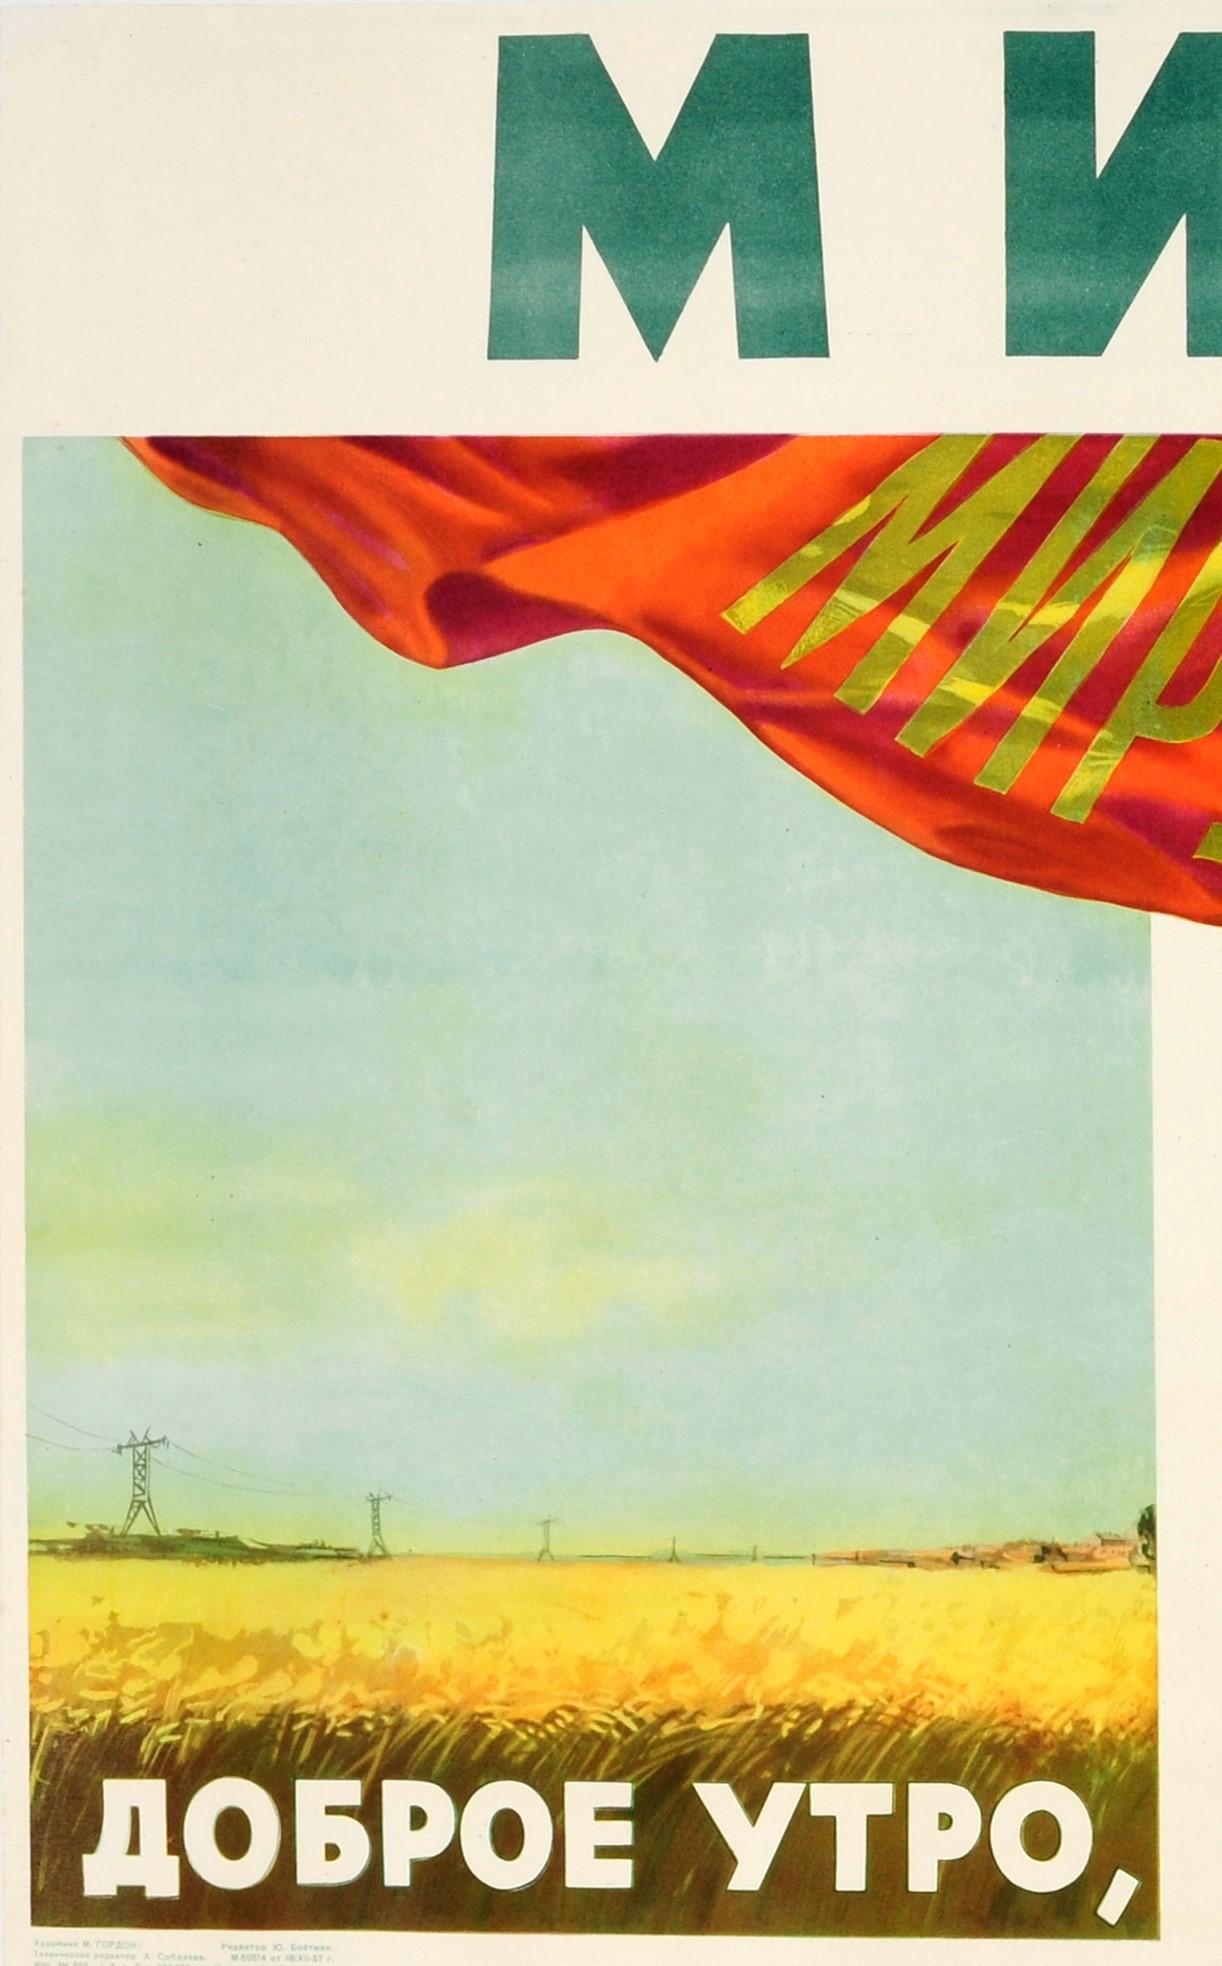 Original vintage Soviet propaganda poster - Peace is: good morning, happy day and tranquil night - featuring three images under a red banner for World Peace, an agricultural field on the left with the sun shining on the corn and electricity pylons